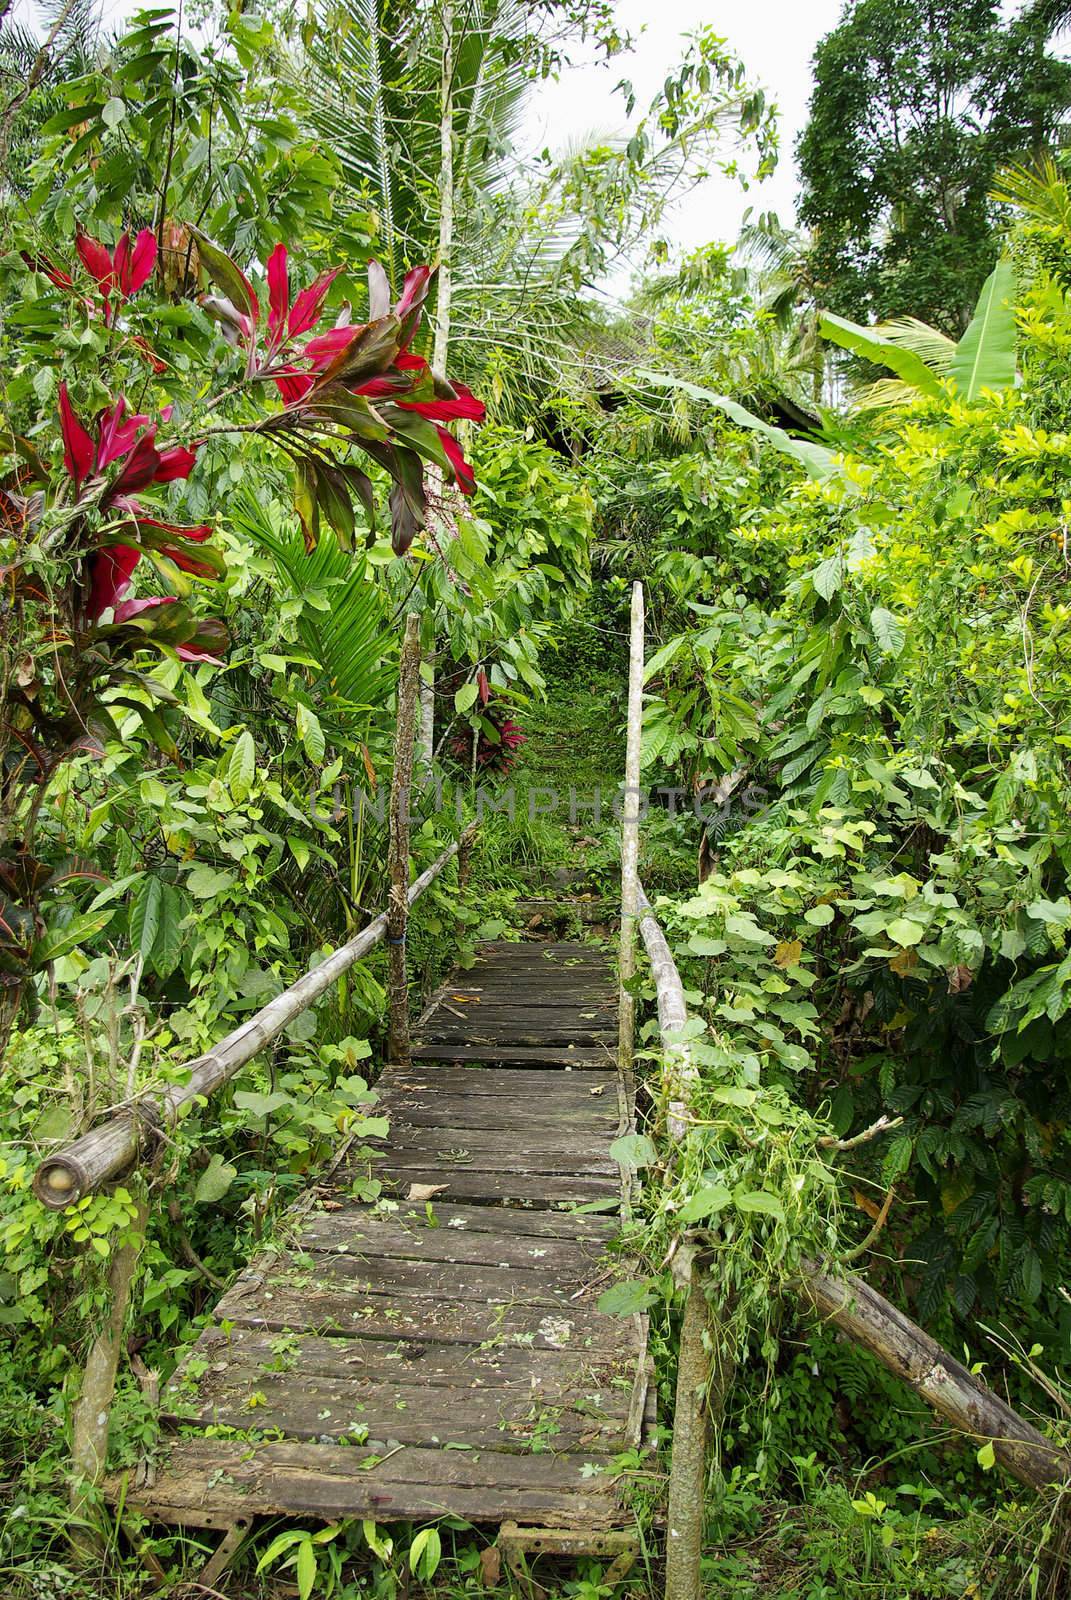 It's an old gateway, wet and worn, lost in the lush vegetation of Bali island